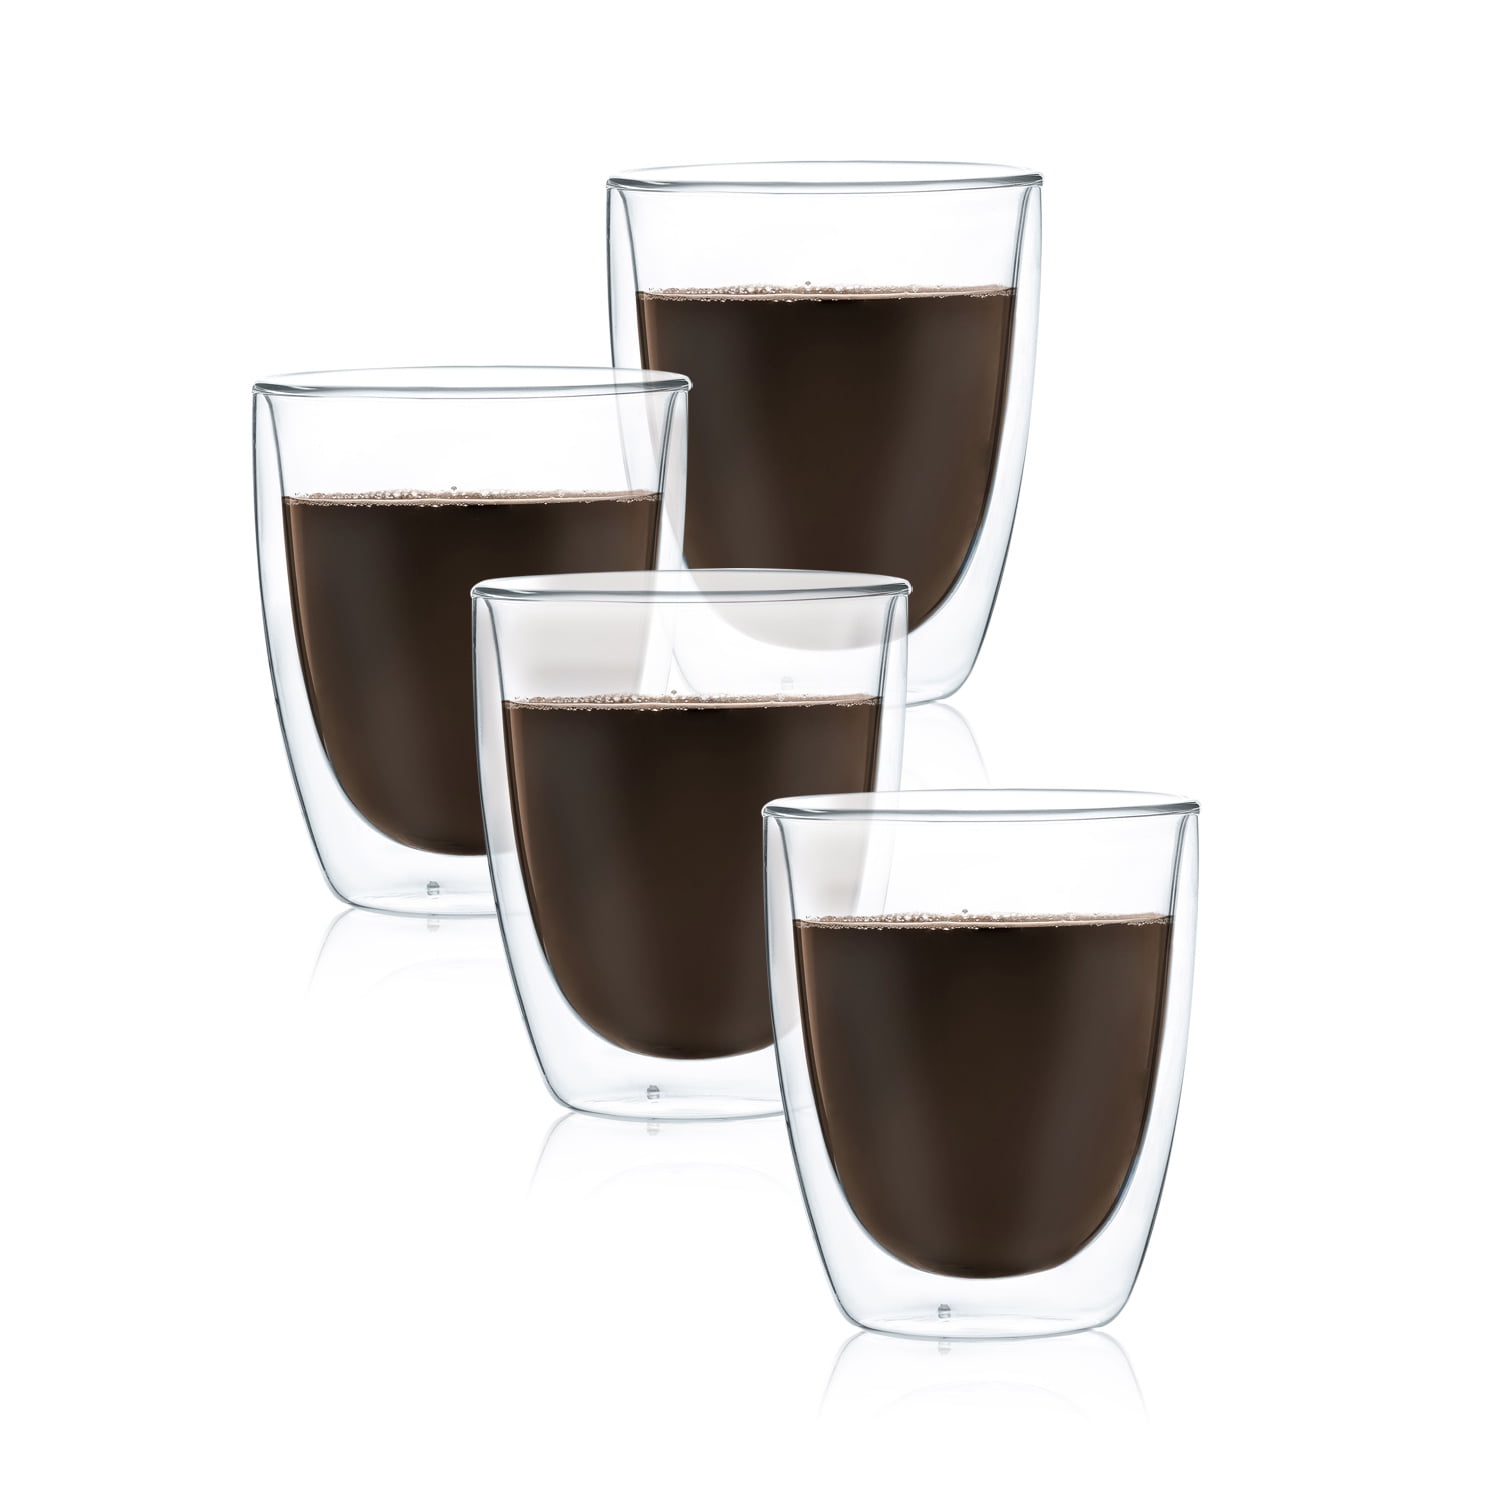 systeem speelgoed Panter JavaFly Double Wall Glass Mug, Set of 4, Tea Cups and Insulated Coffee Mugs  for Latte, Espresso, Cappuccino, 8.5 oz - Walmart.com